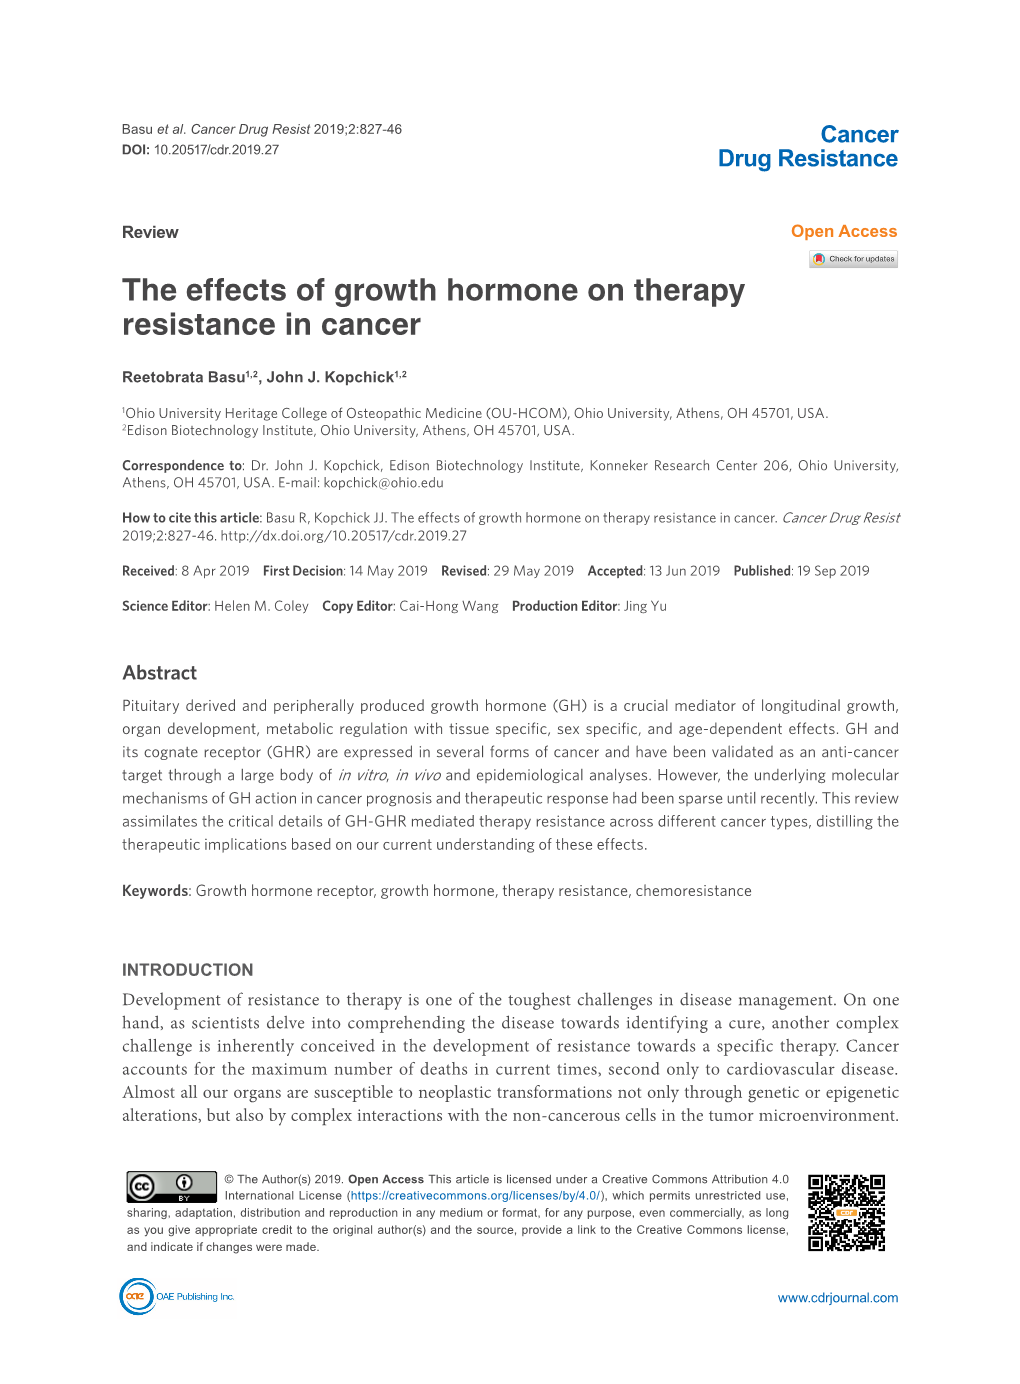 The Effects of Growth Hormone on Therapy Resistance in Cancer